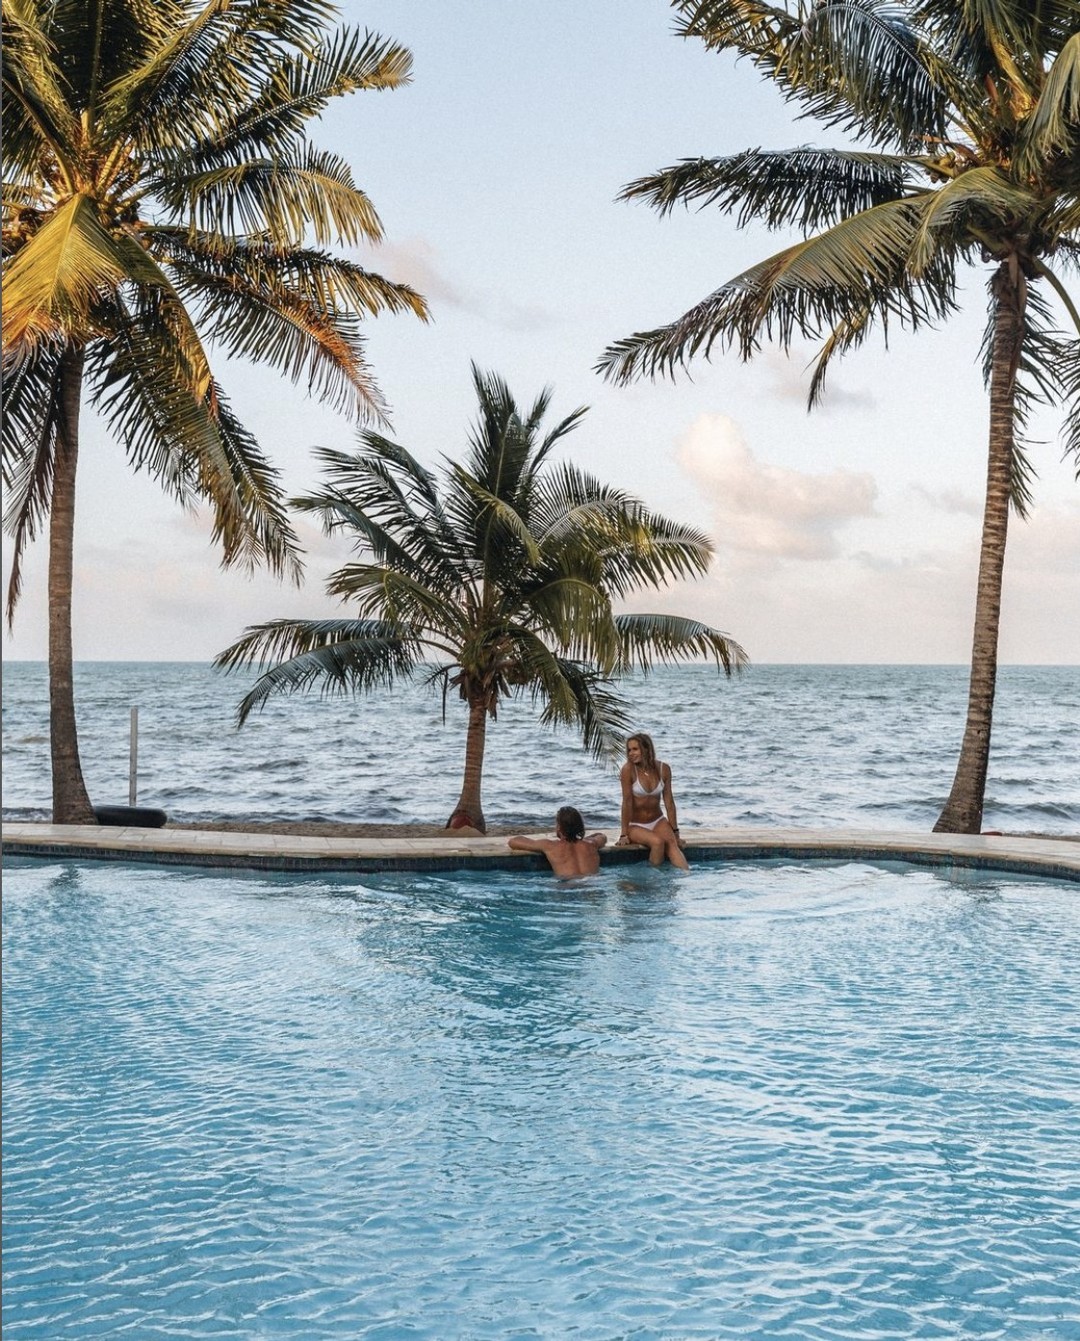 In Belize, the toughest decision you might have to make is to lounge at the pool or the beach. Which do you choose? #travelbelize

????- @almond.beach.resort